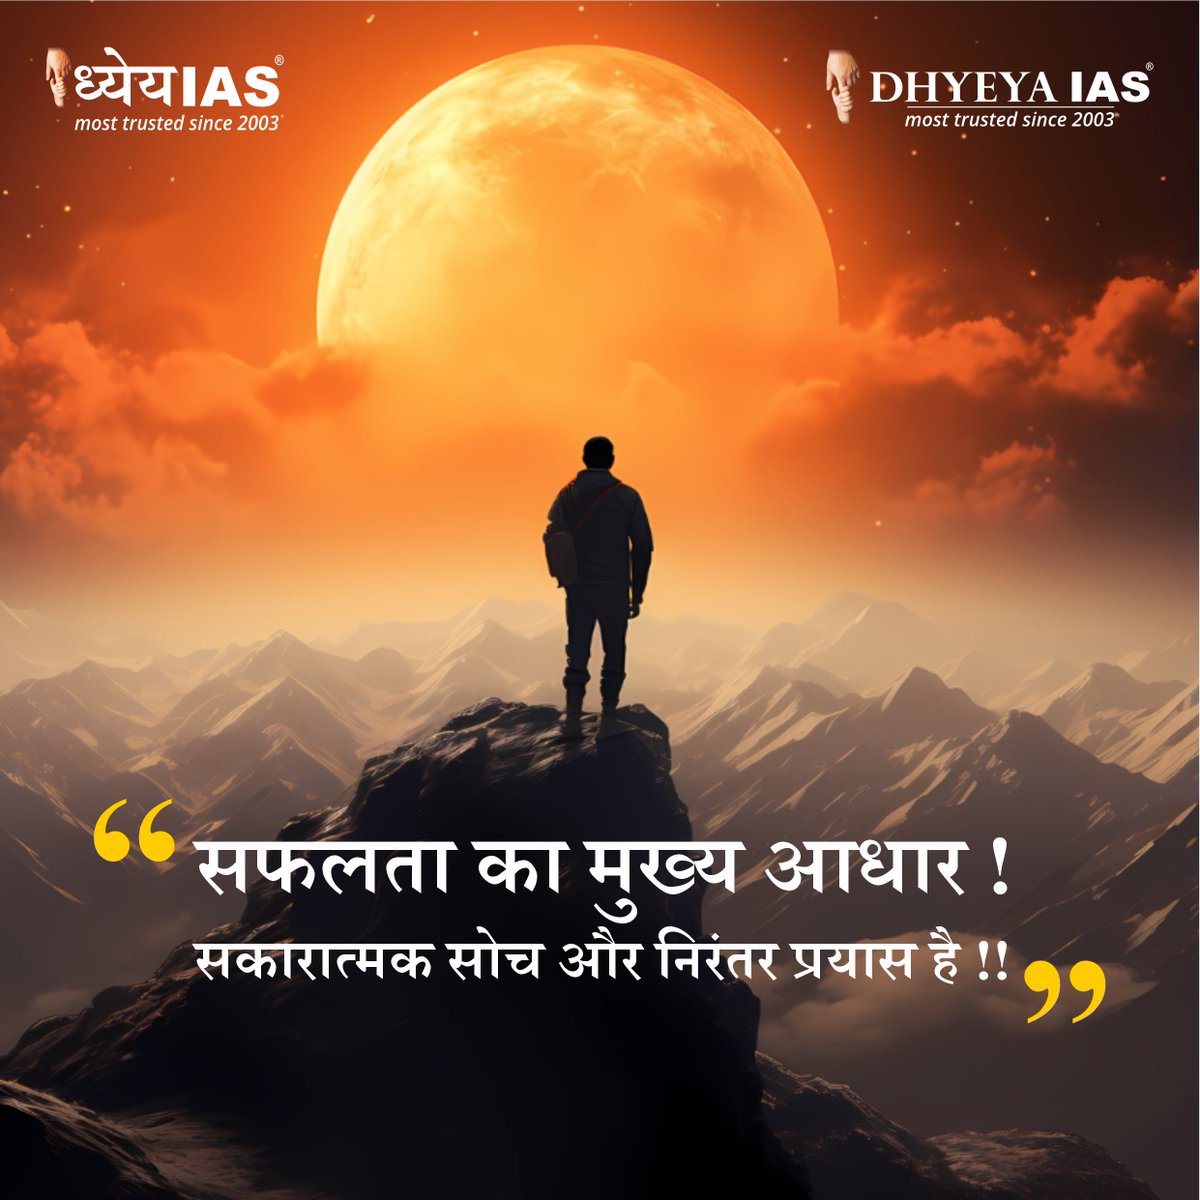 आज का विचार। 😊
Follow us for our daily motivational quotes.
______________________________________________
#morningmotivation #goodmorning #sucessful #sucessfulquotes #hindiquotes #DhyeyaIAS